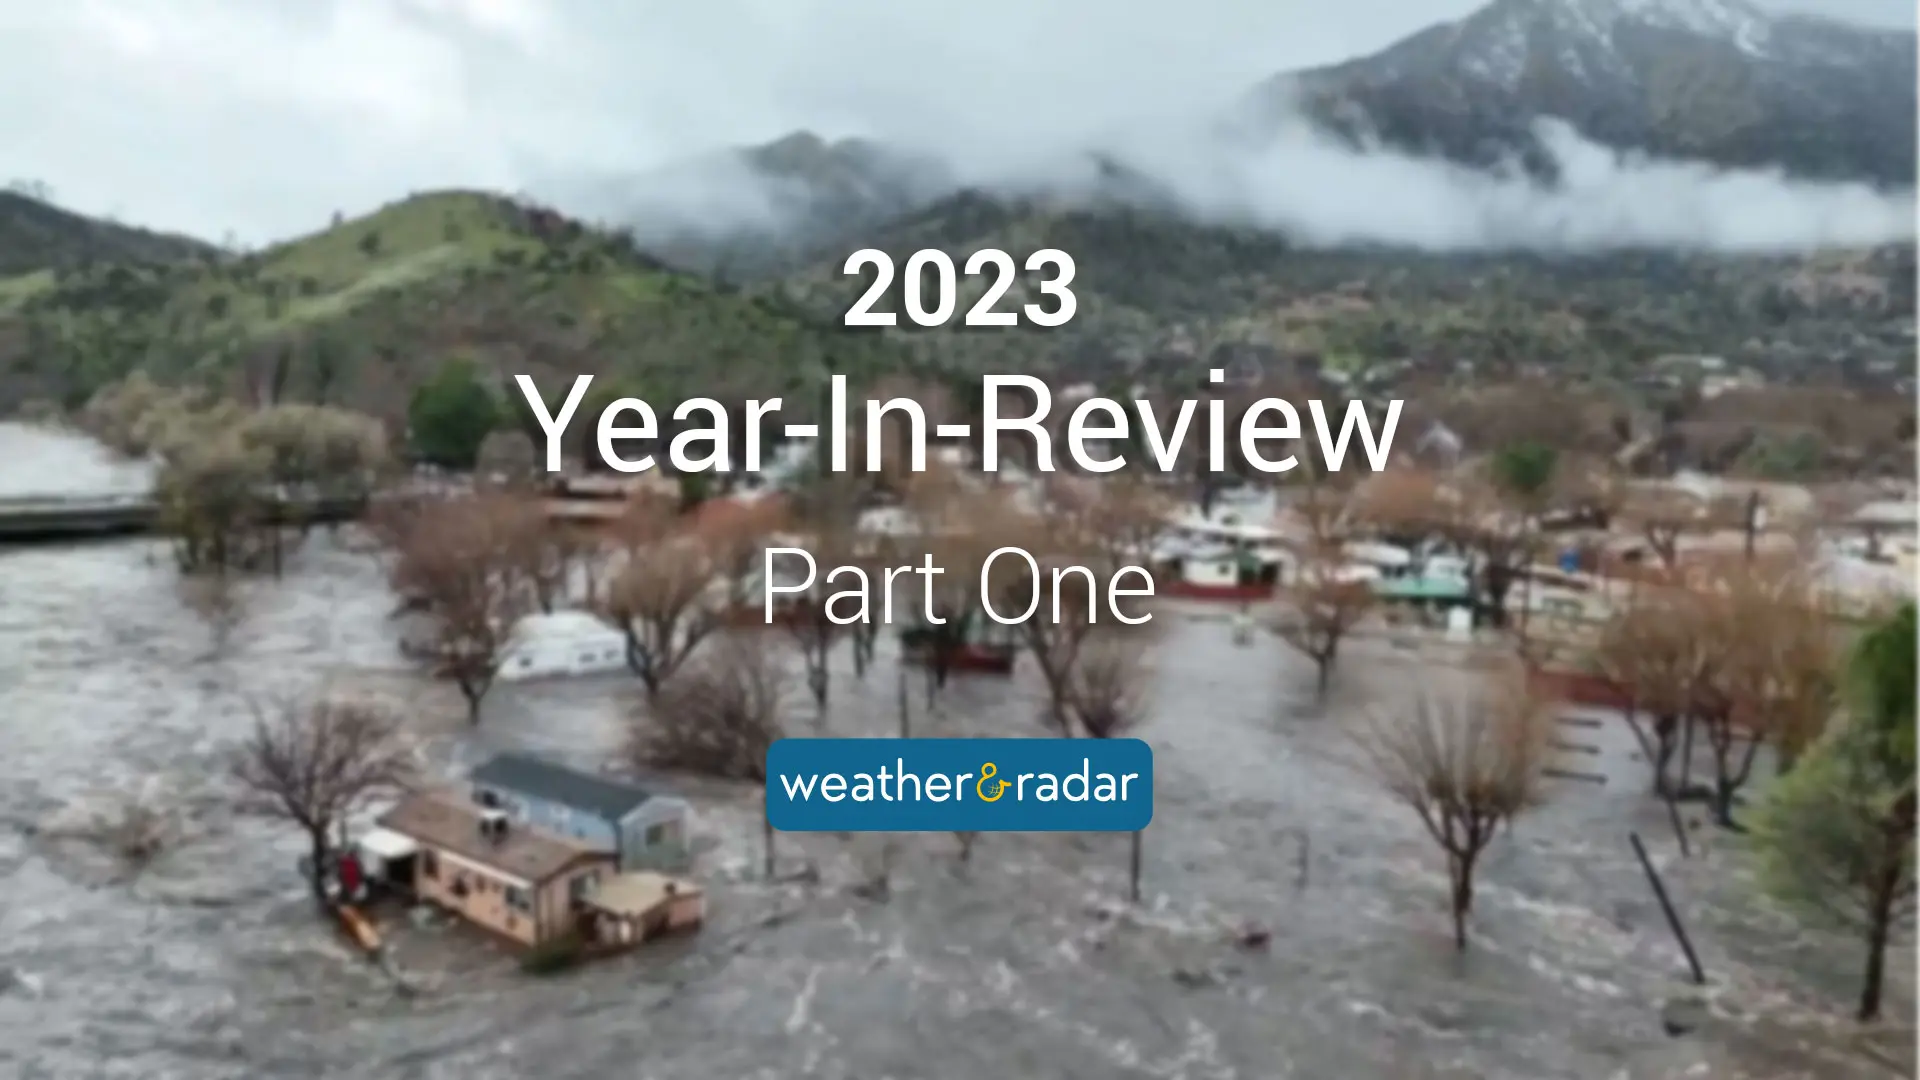 Disastrous flooding in Kernville, Calif., in March 2023.